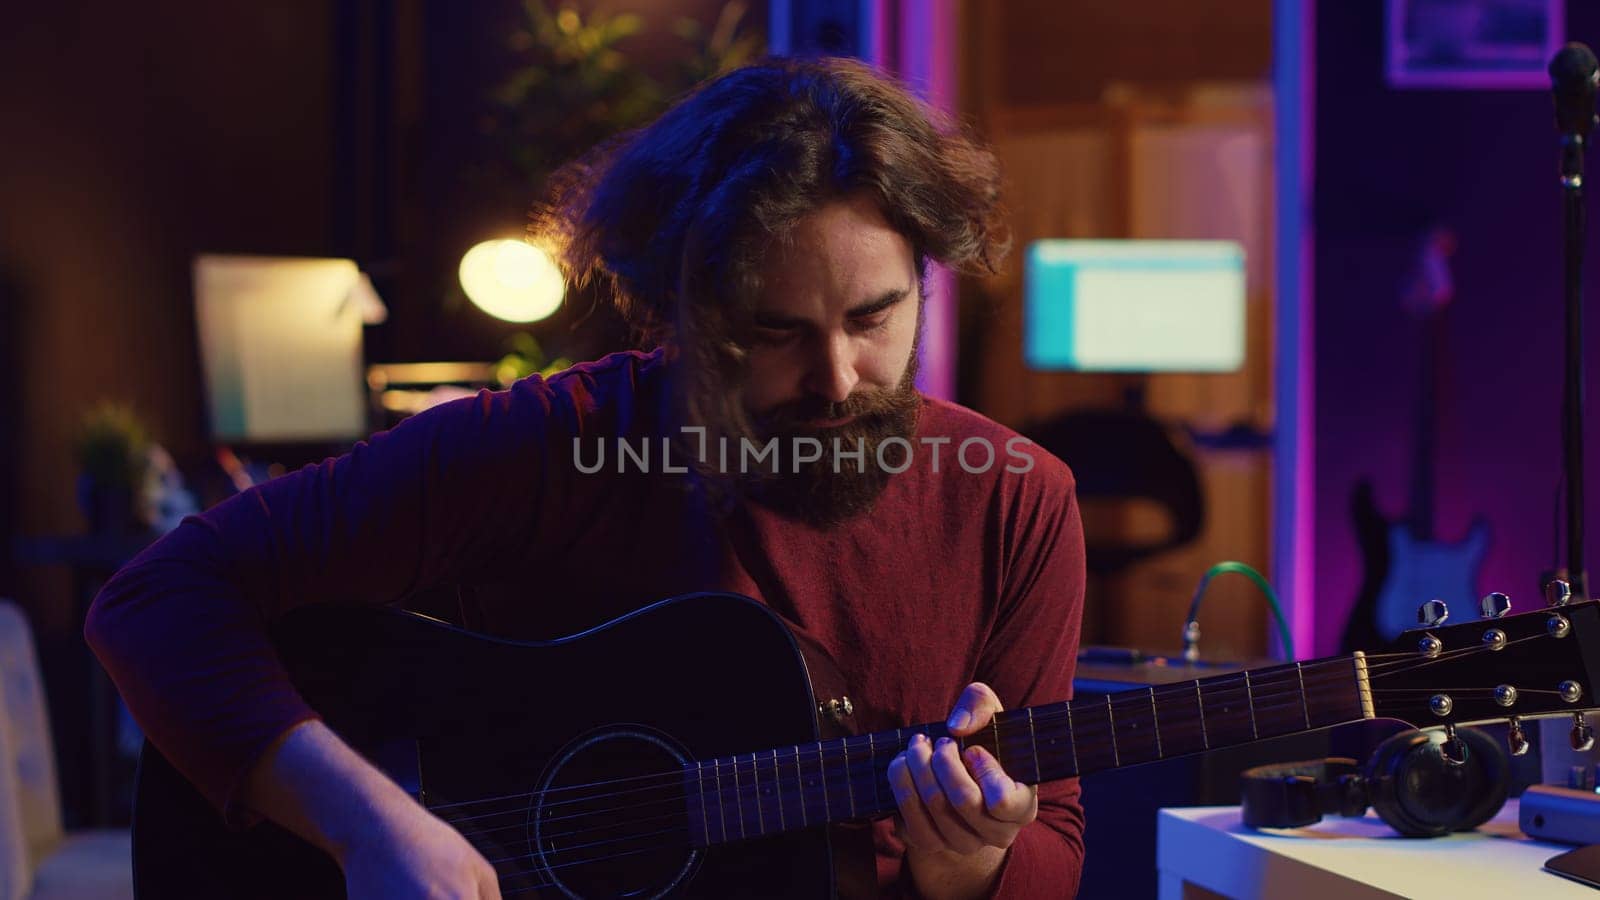 Young man playing guitar and creating music using equalizer daw software interface. Music producer recording song in home studio and mixing acoustic sounds on stereo console. Camera A.